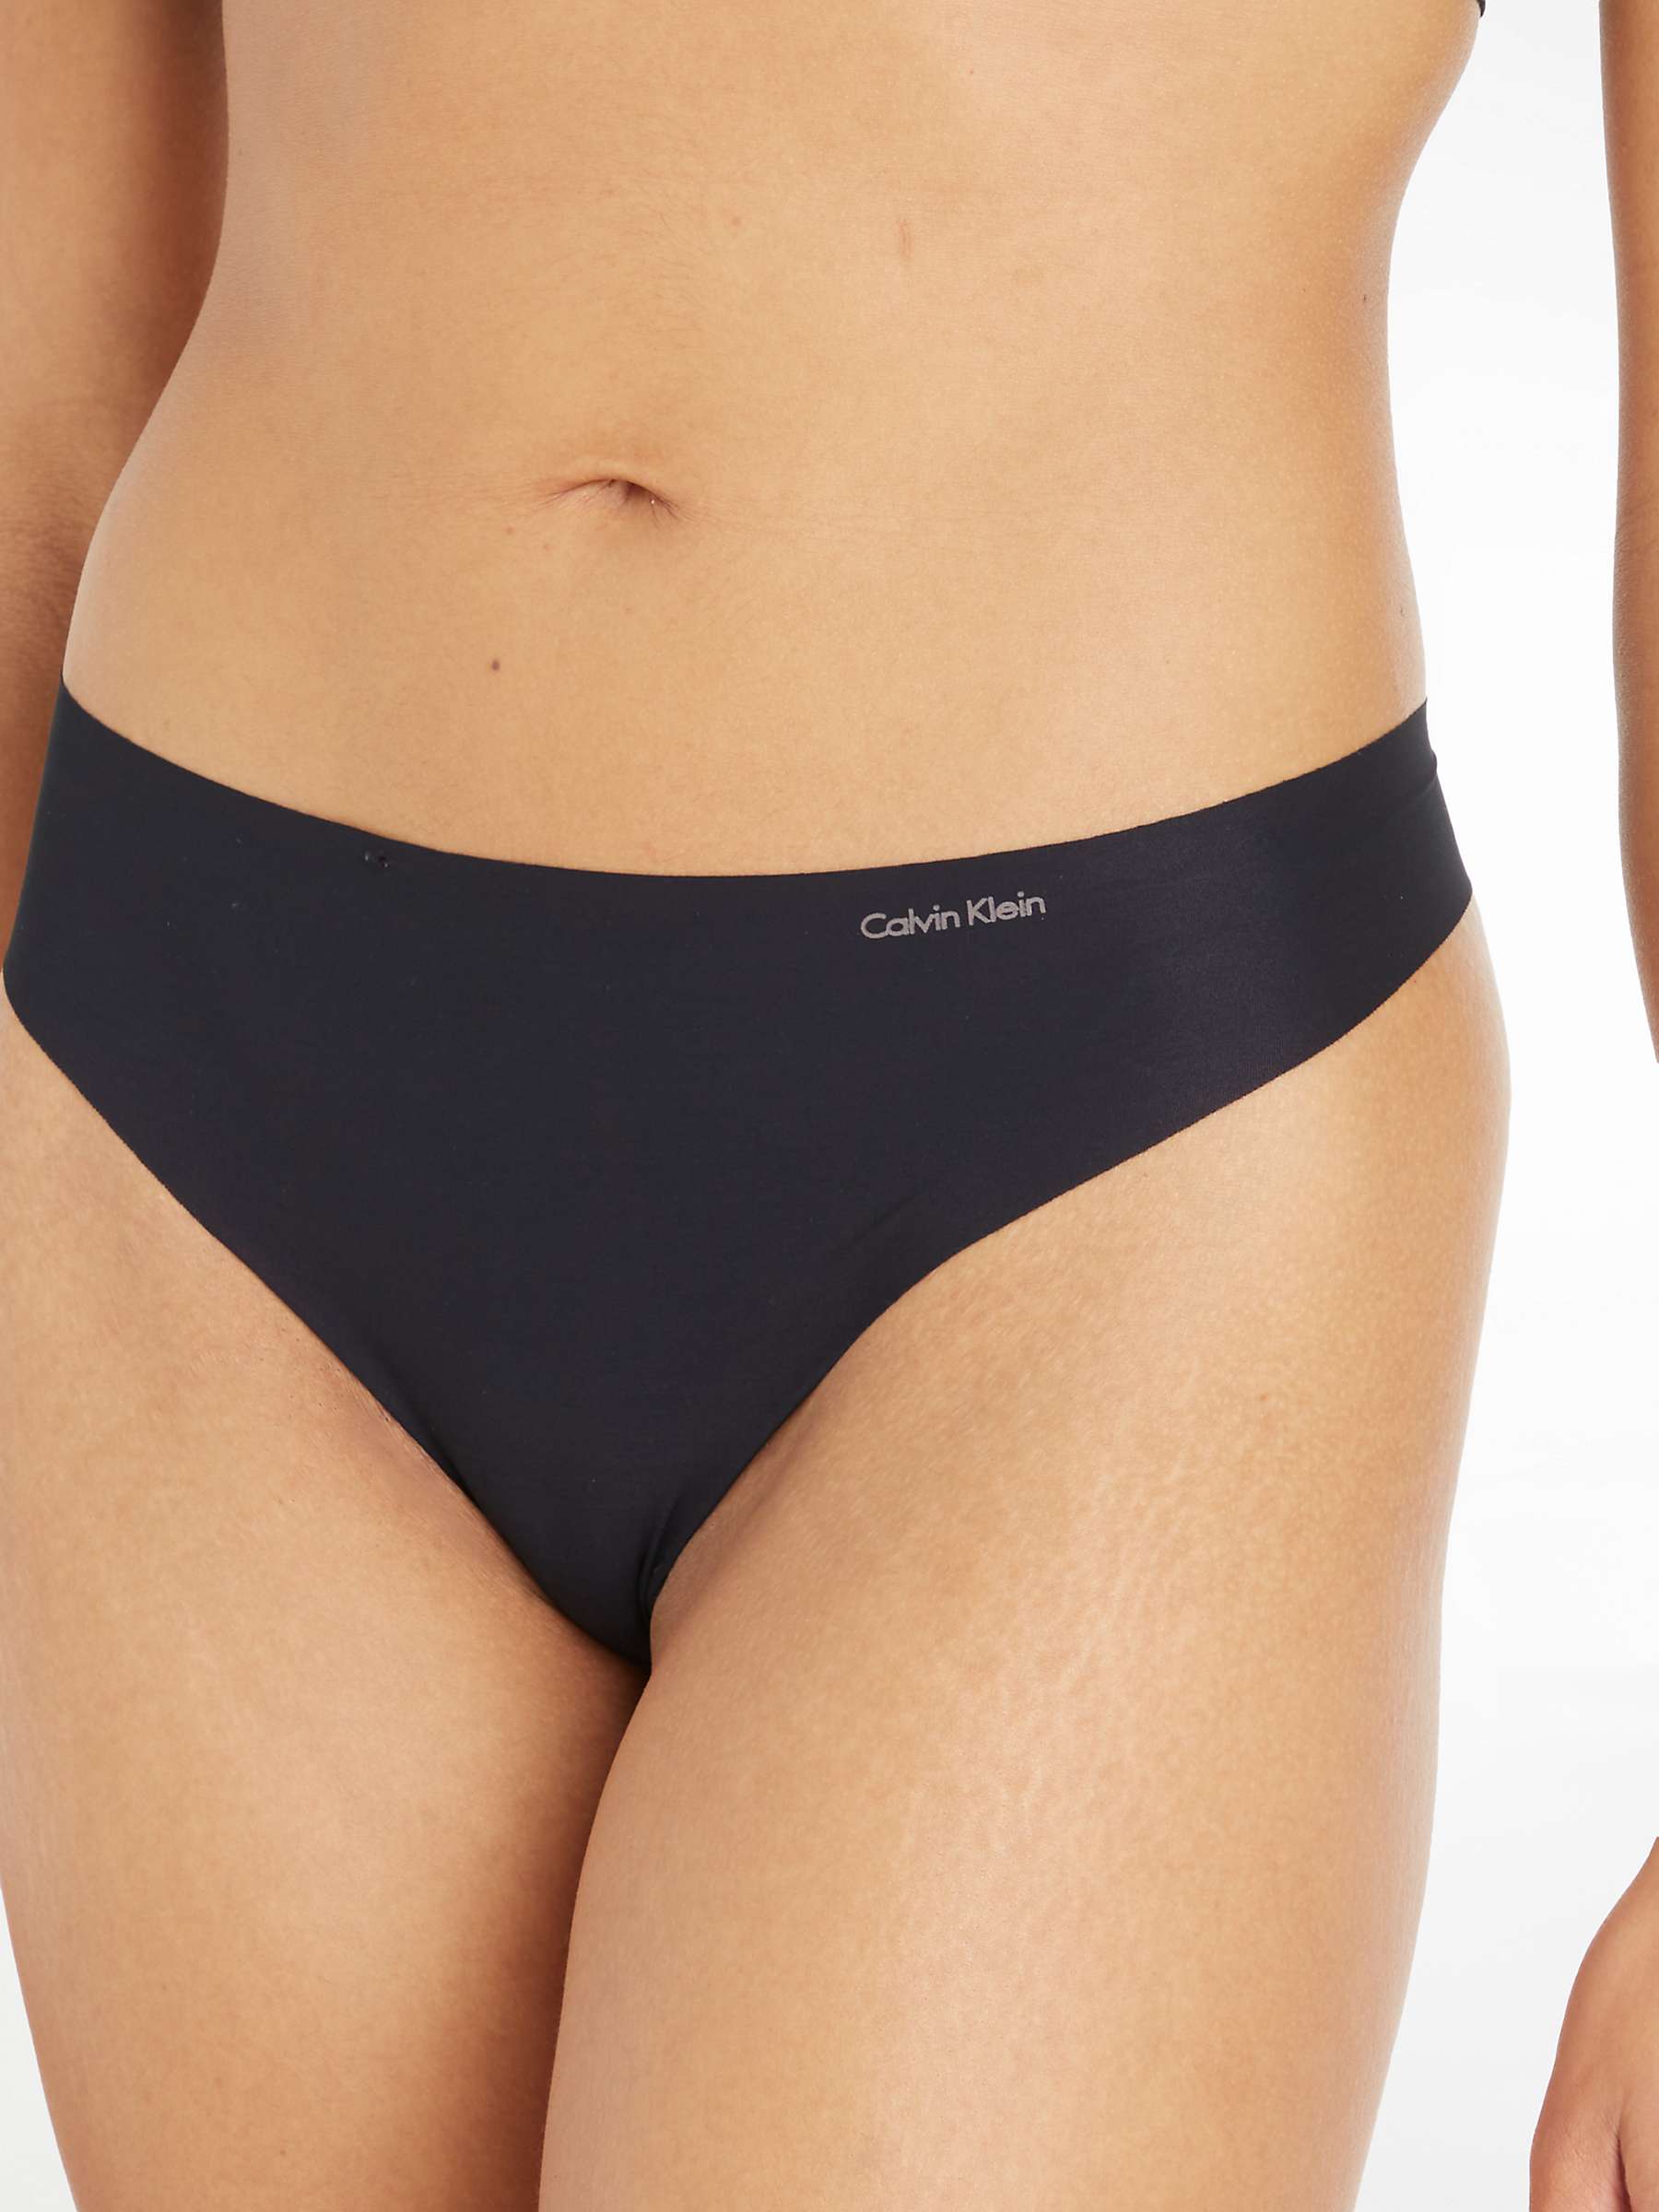 Buy Calvin Klein Invisibles Thong Online at johnlewis.com